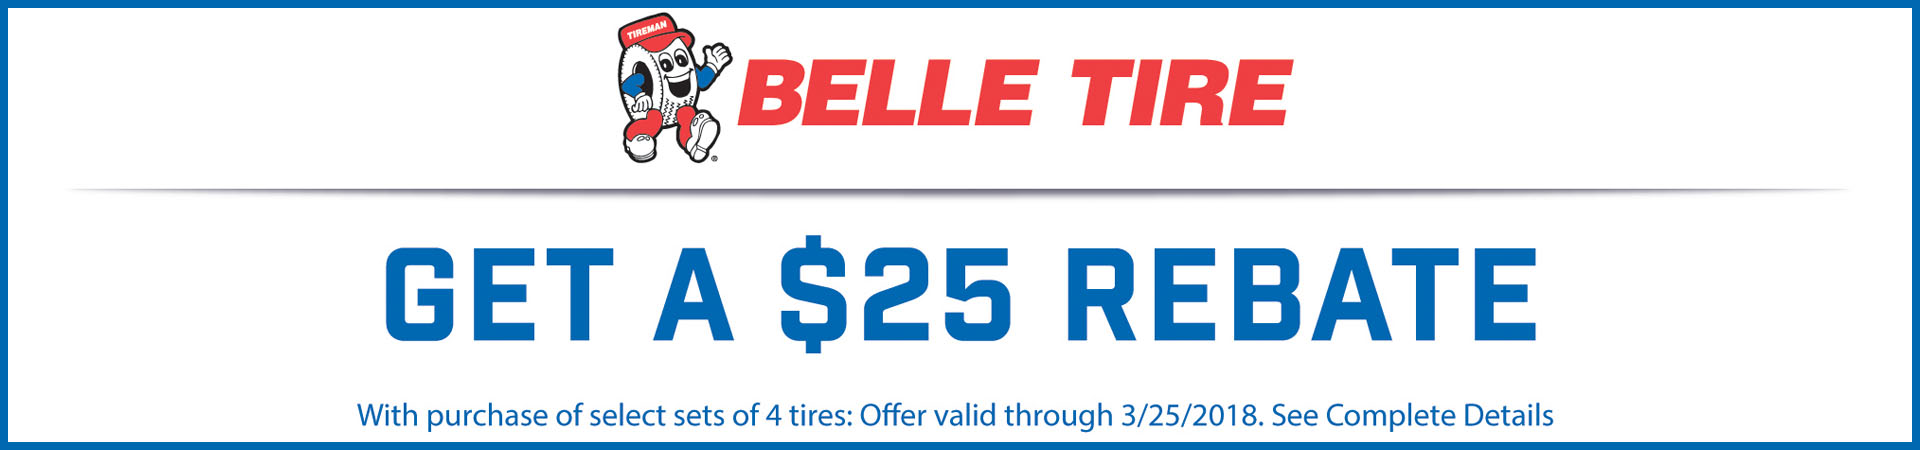 Belle Tire Tire Coupons Manufacturer Rebates